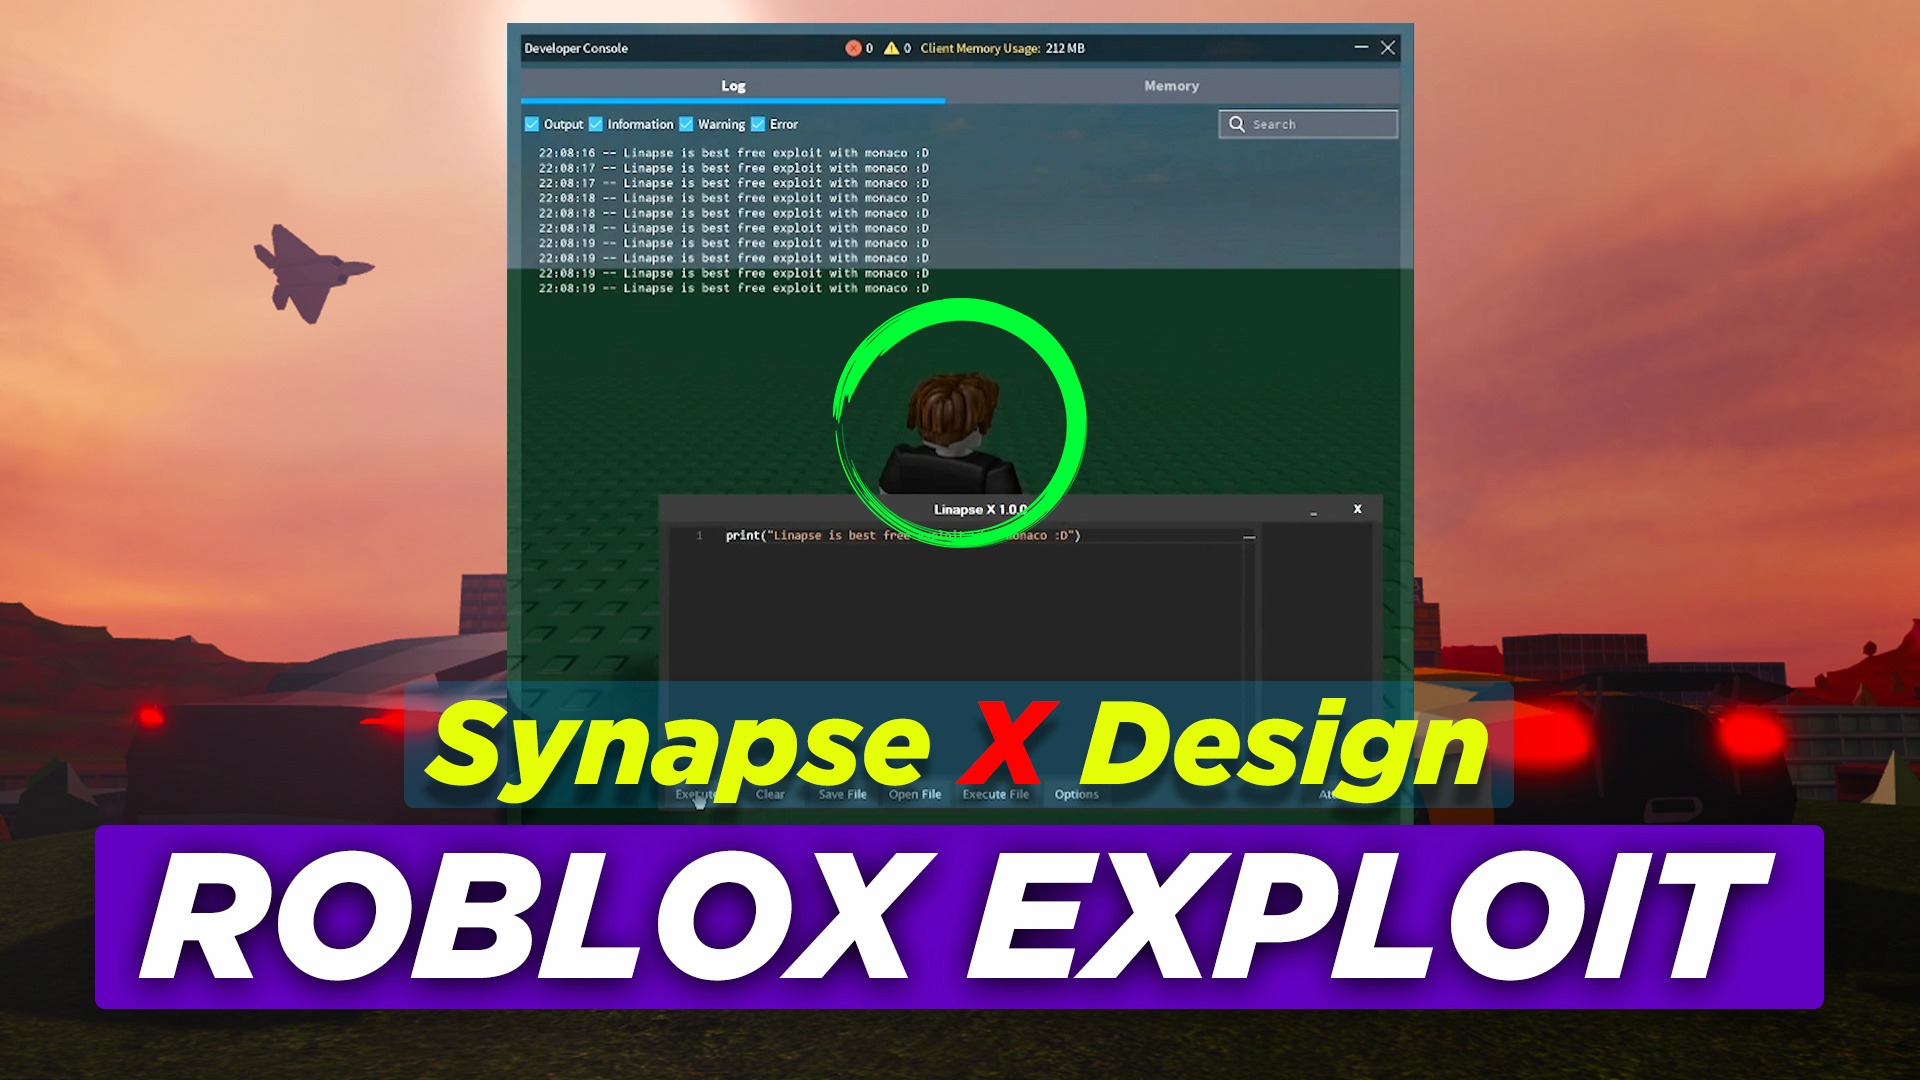 synapse exploit roblox download